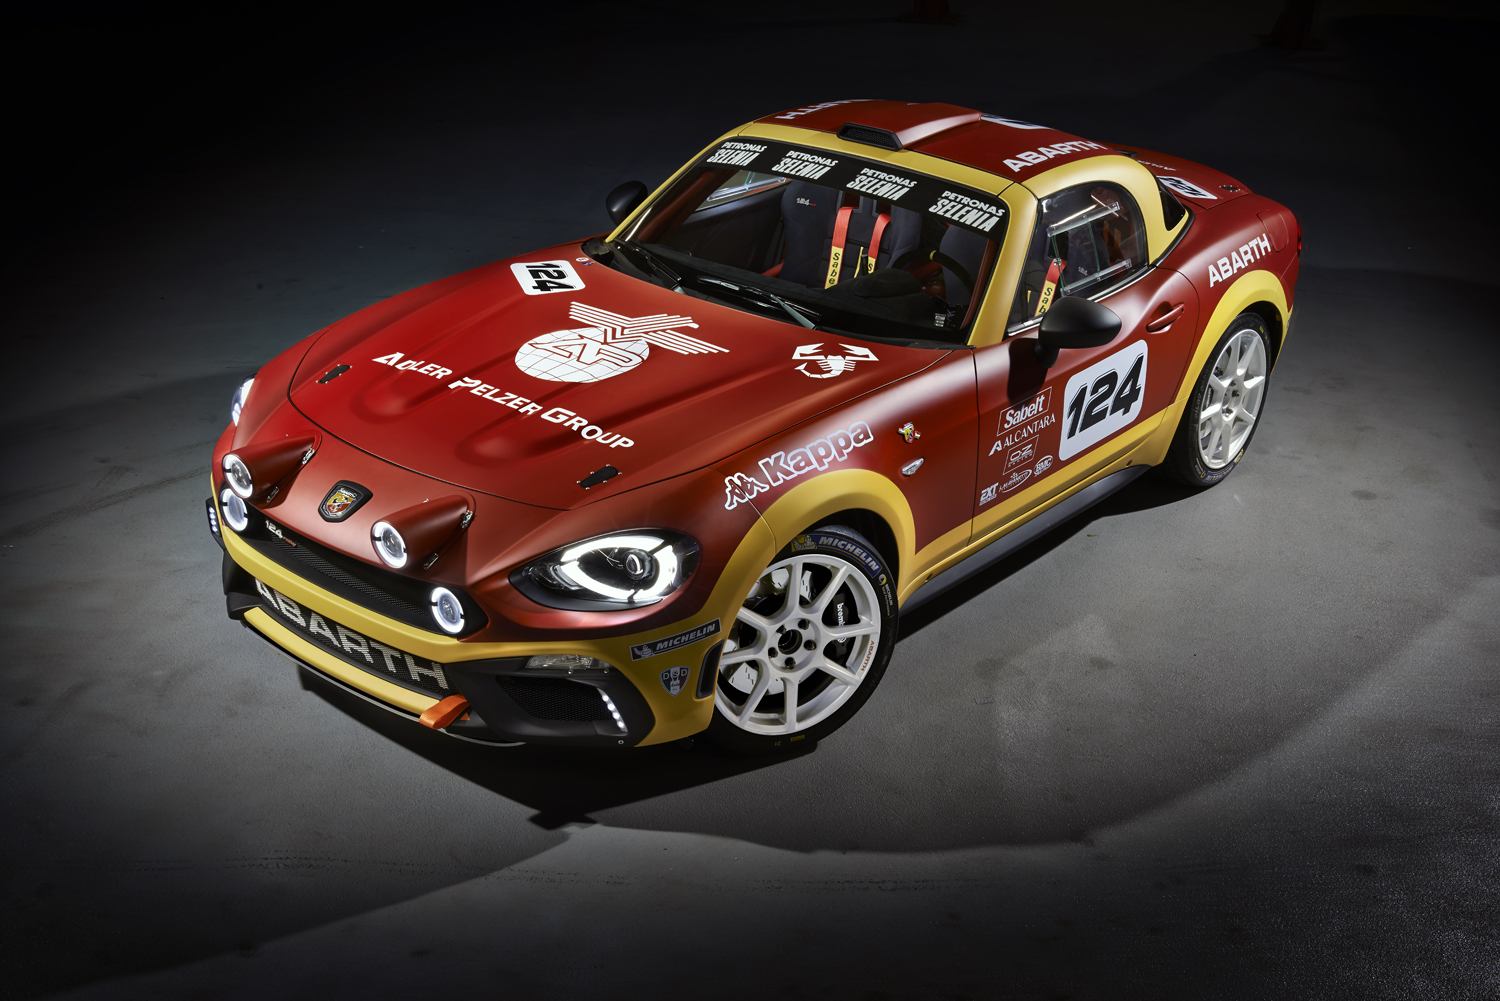 Nowy Abarth 124 rally